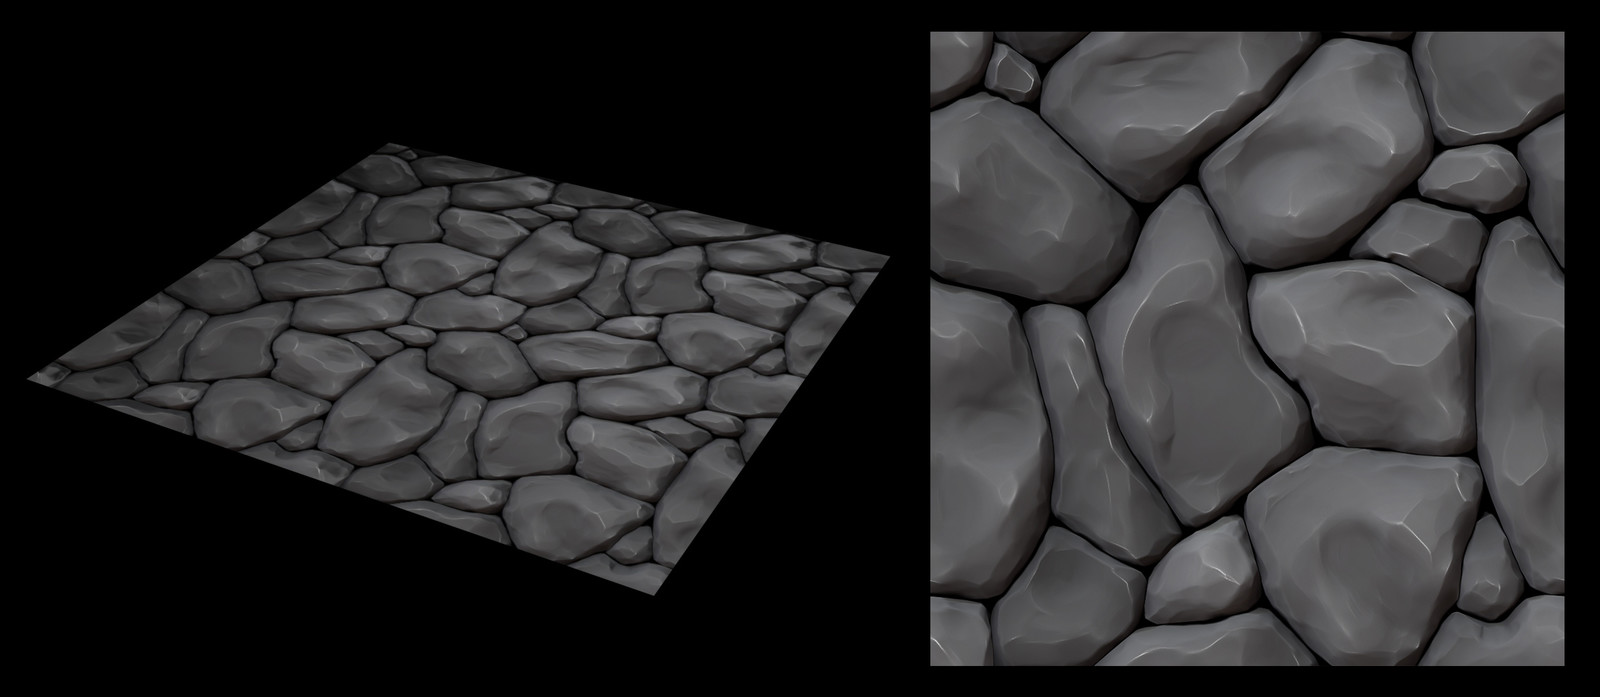 Andreas Paul - Stylized Stone Texture